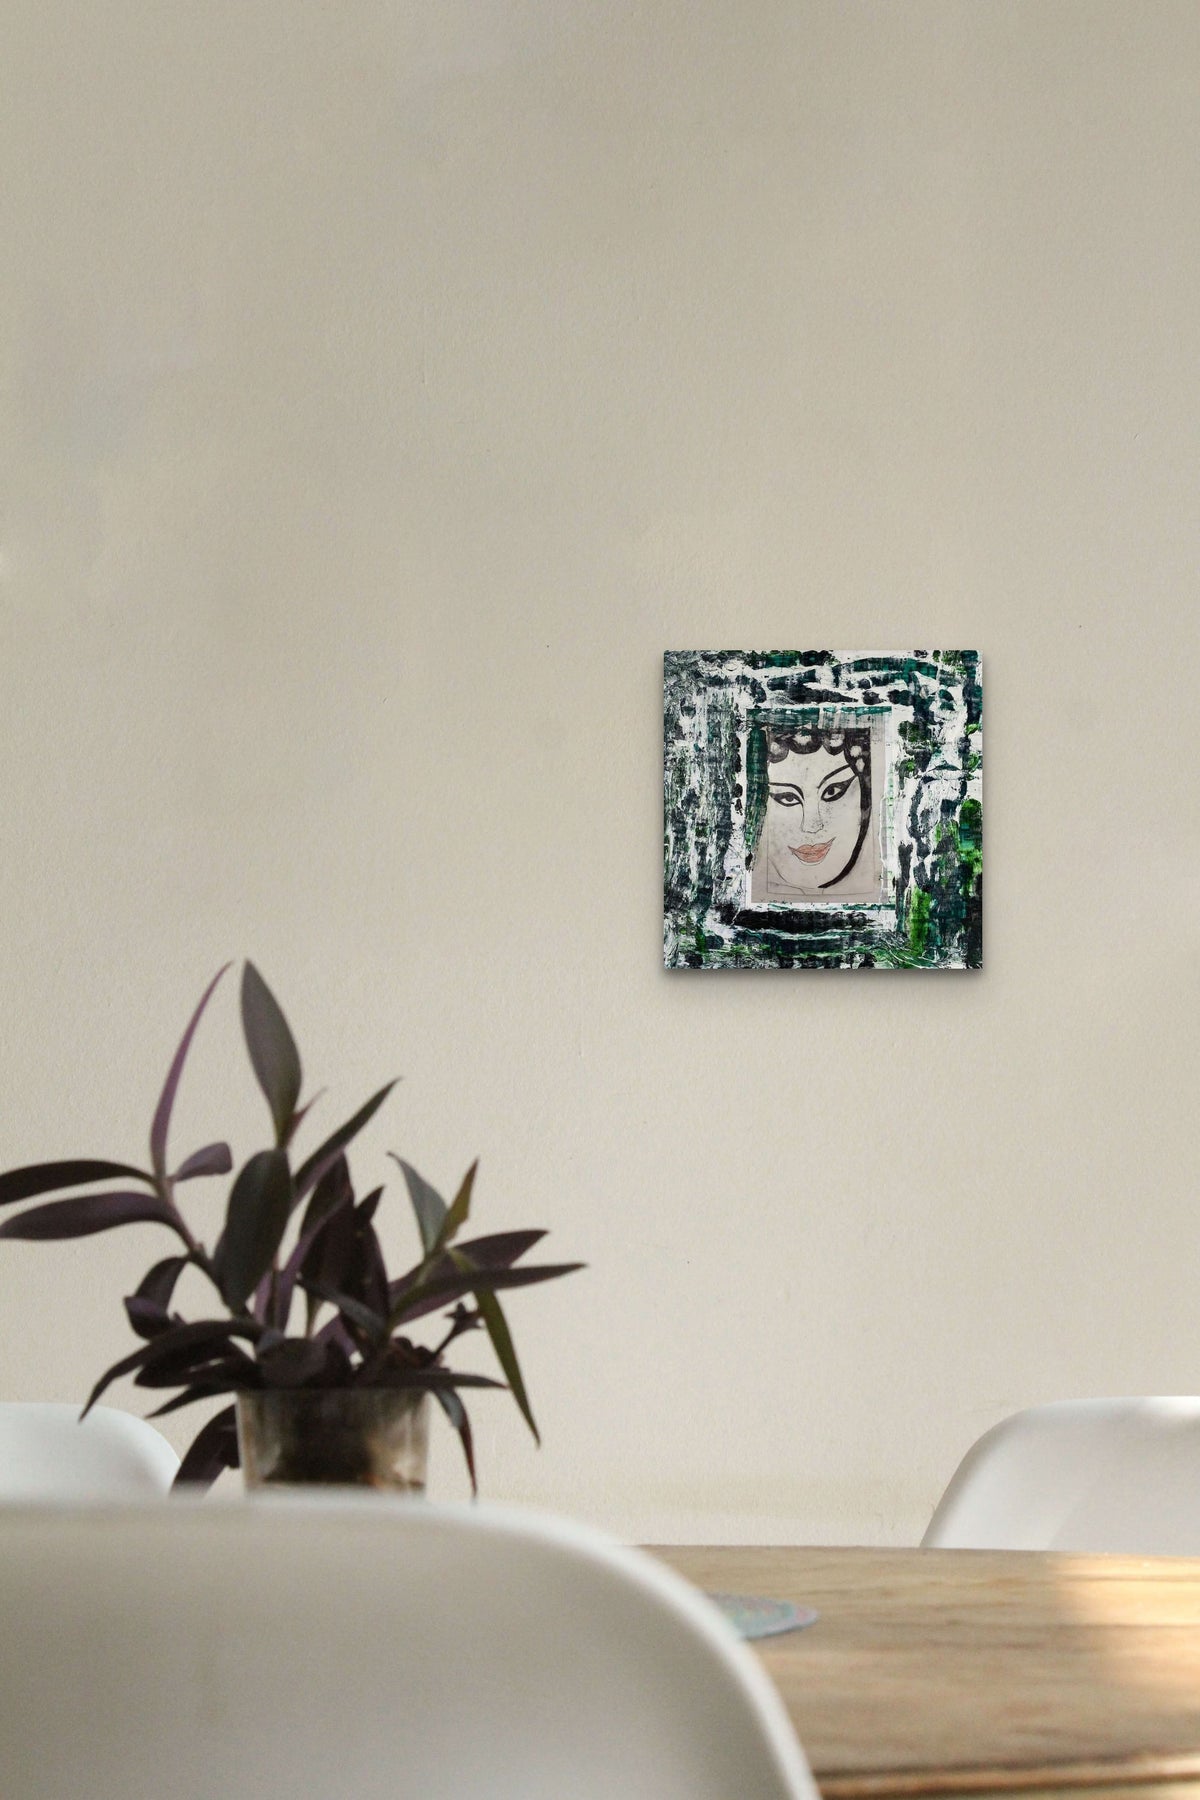 Abstract Portrait Painting adds emotion, life & cultural theater to this kitchen area